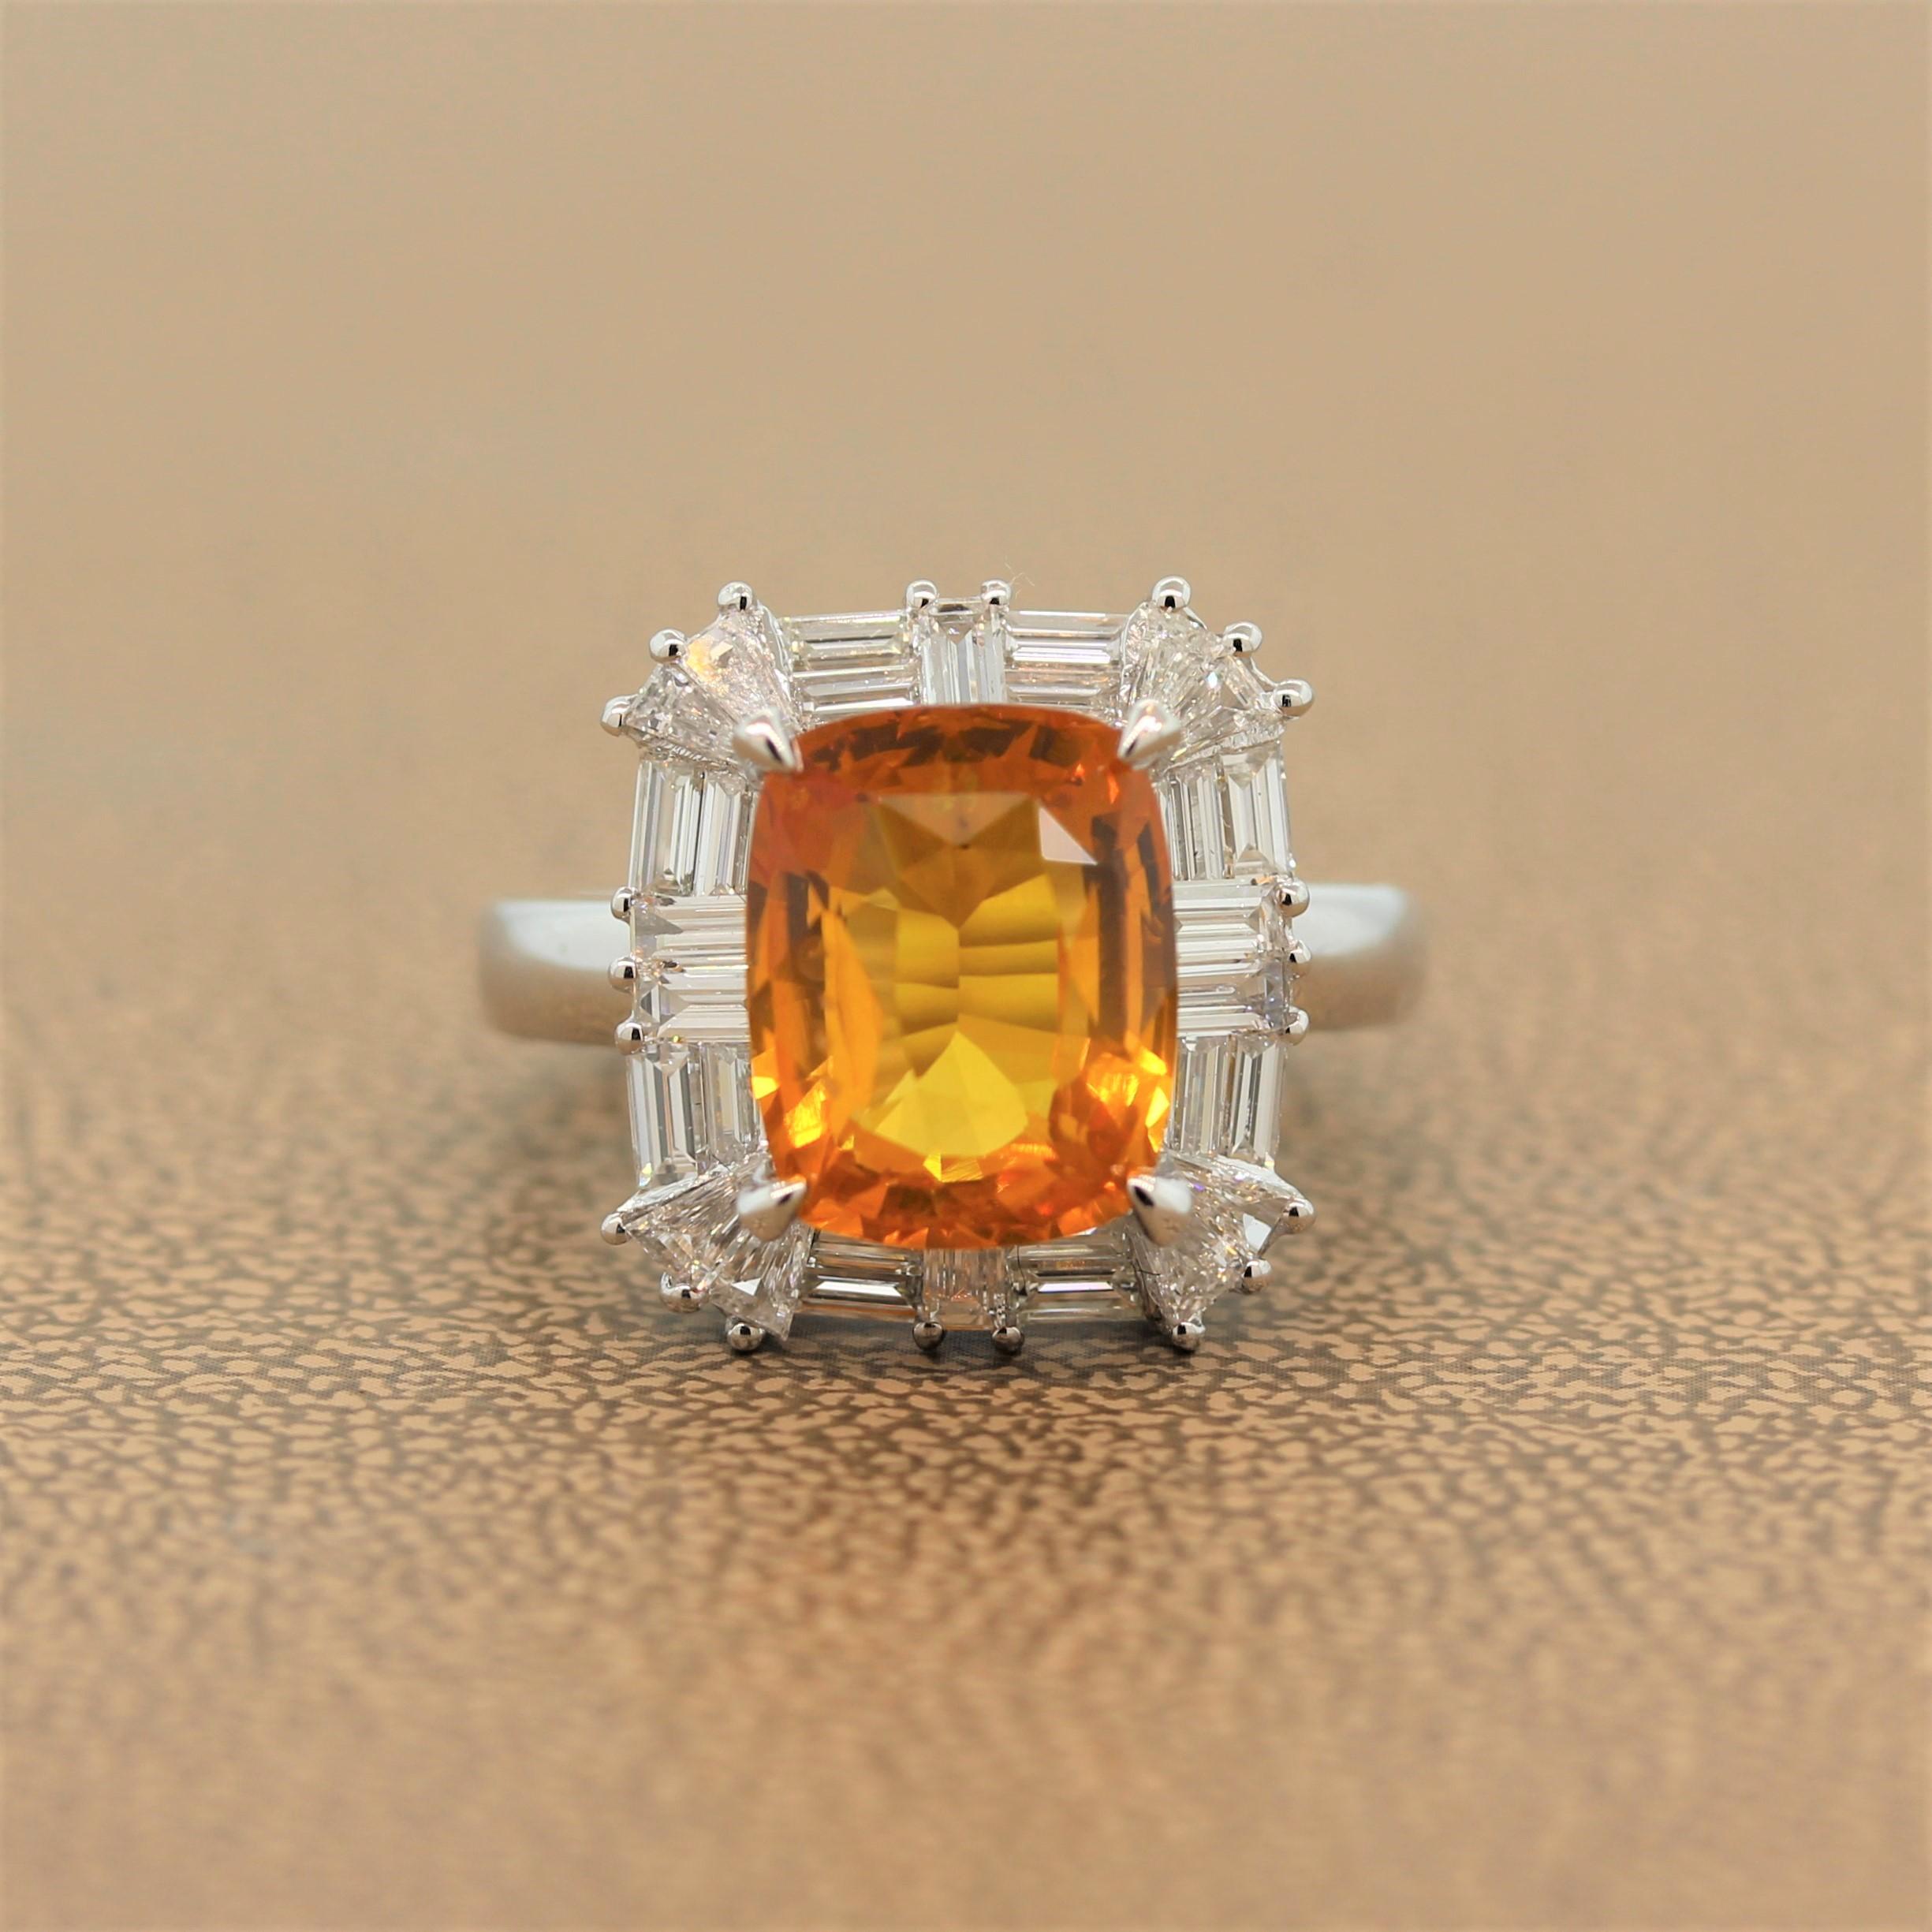 A lively ring featuring a 5.33 carat vivid orange sapphire. The cushion cut fancy colored sapphire is haloed by a decorative pattern of 1.69 carats of baguette and tapered baguette cut sparkling colorless diamonds in a hand fabricated 18k white gold